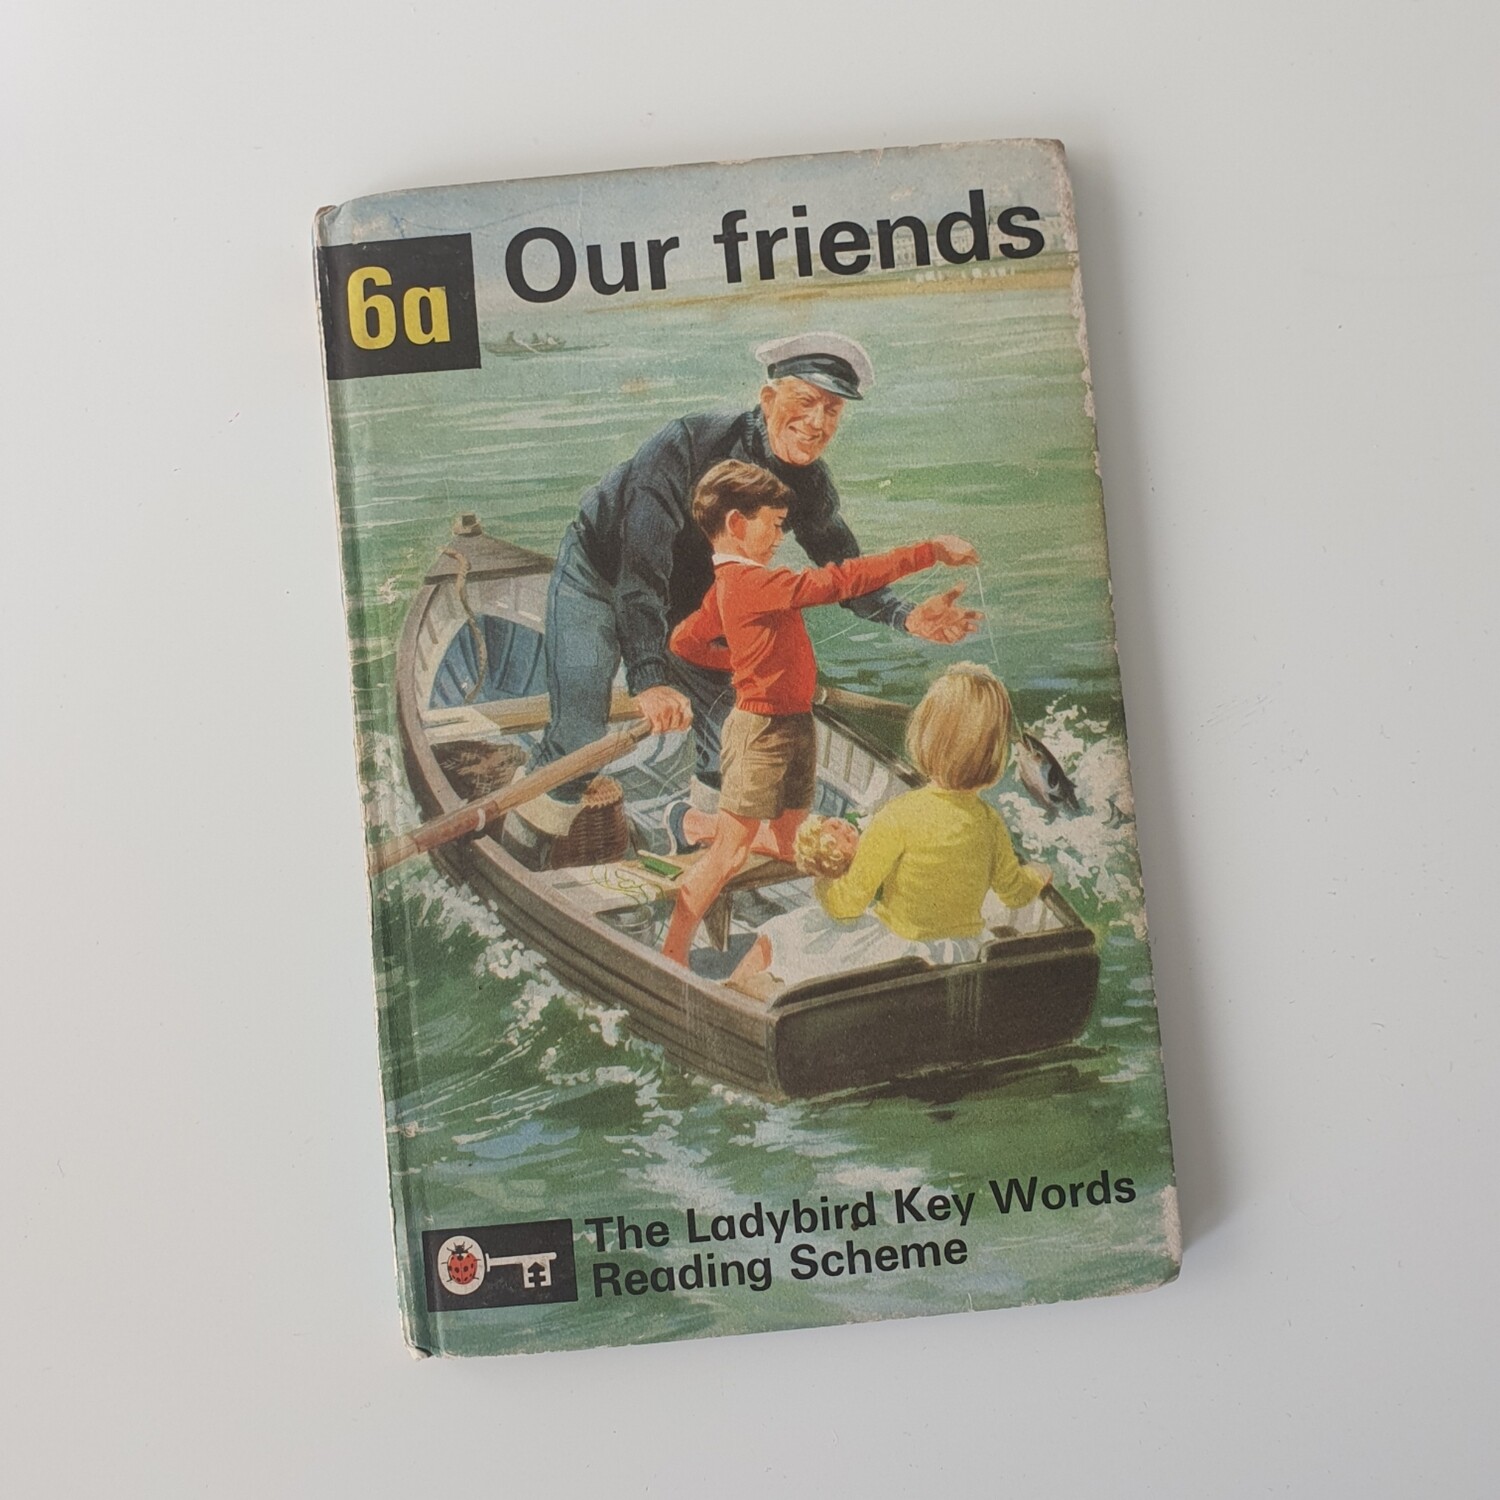 Our Friends - Peter & Jane Notebook - Ladybird book boat fishing